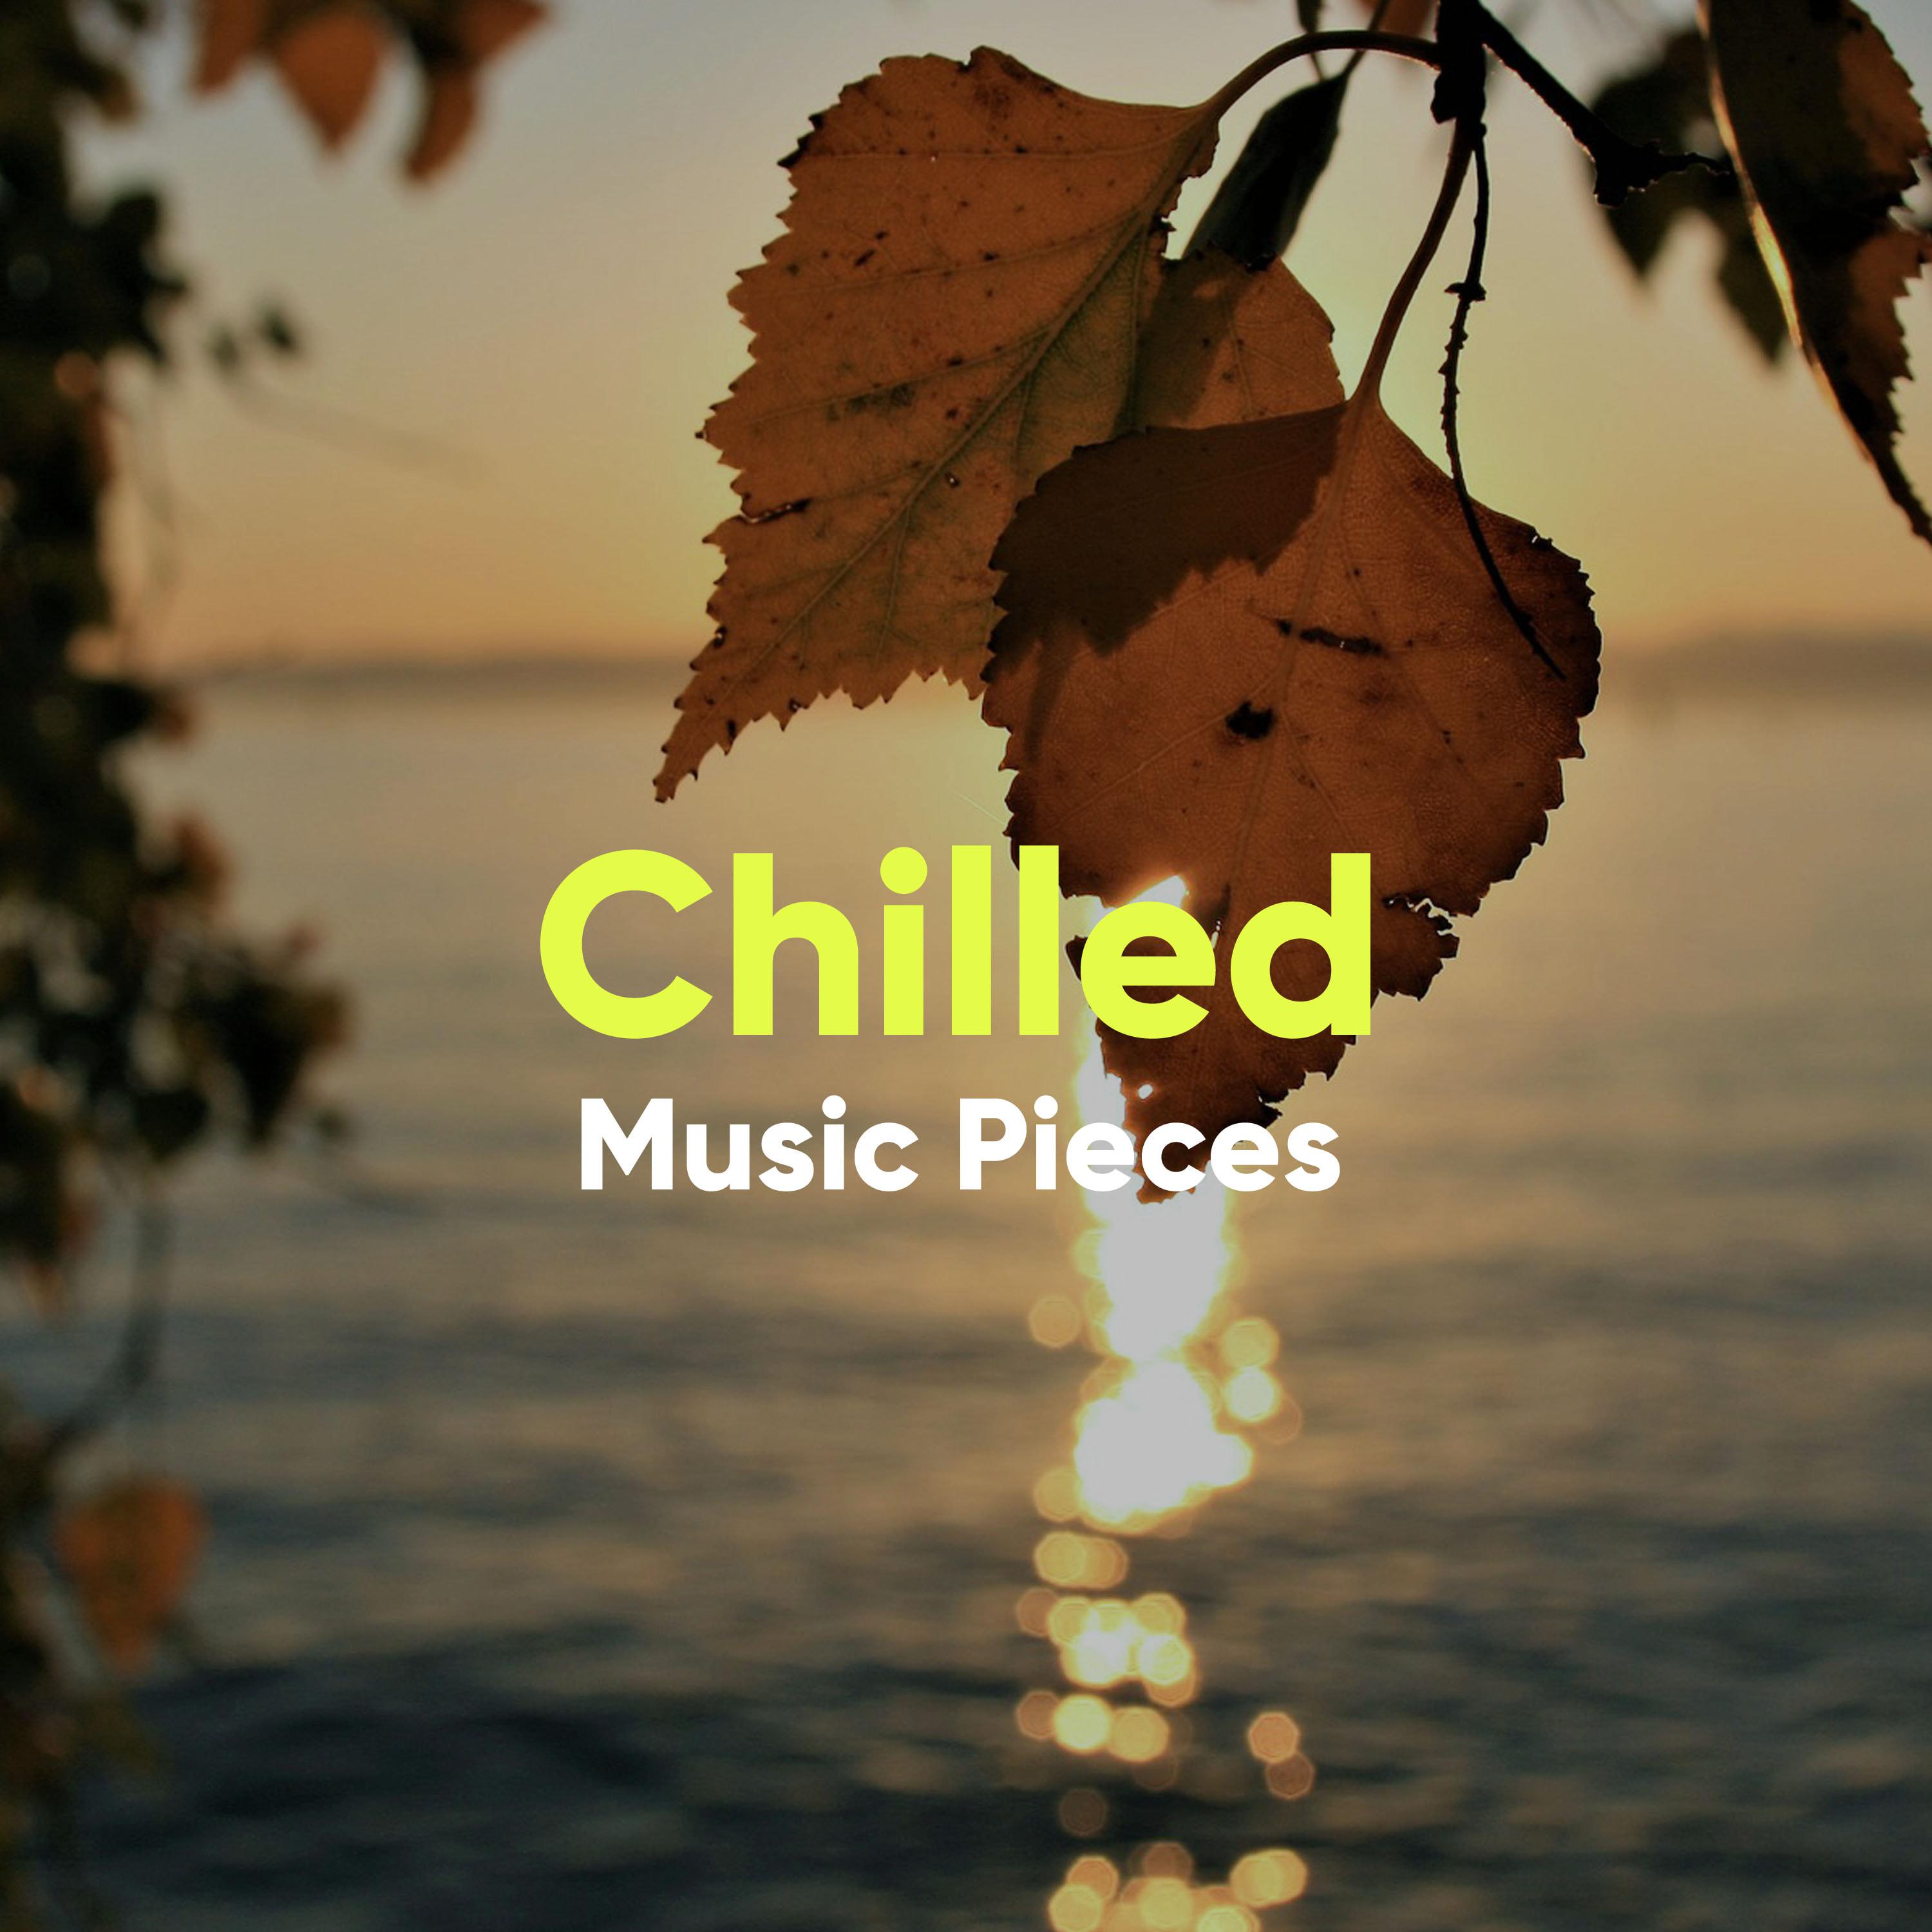 Chilled Music Pieces